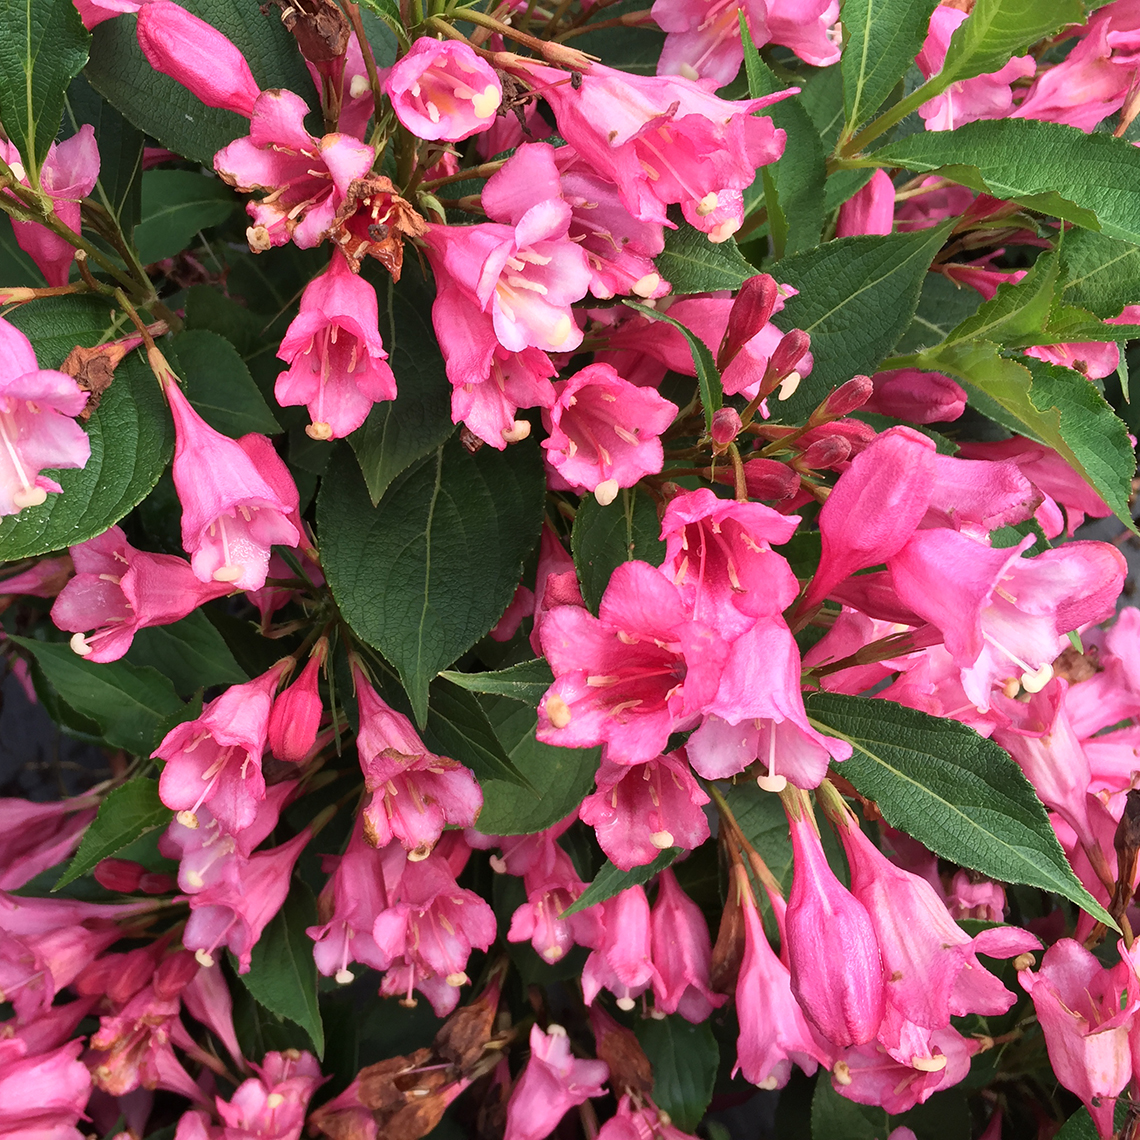 Closeup of the flowers of Czechmark Twopink weigela which are dark pink in the middle and a lighter pink around the edge